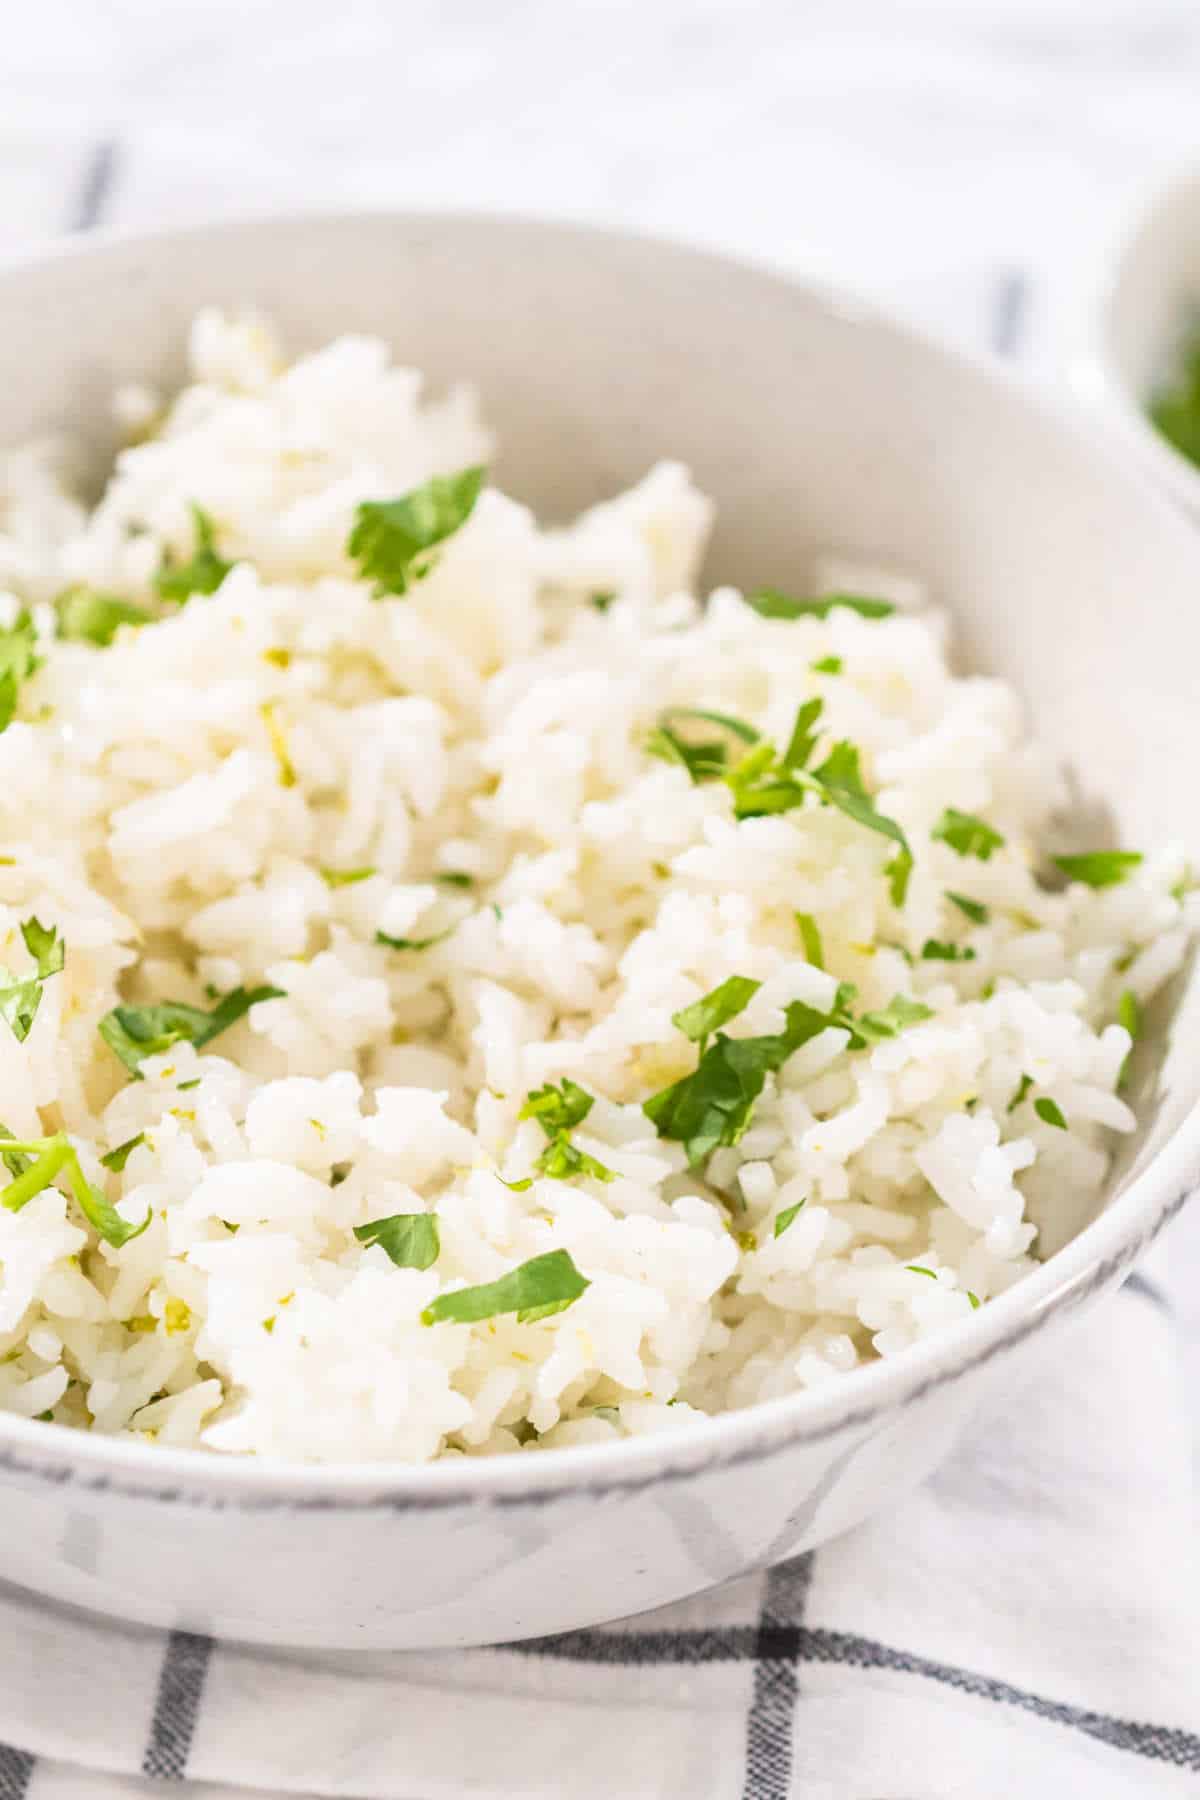 serving cilantro lime rice garnished with fresh chopped cilantro in white ceramic bowls.